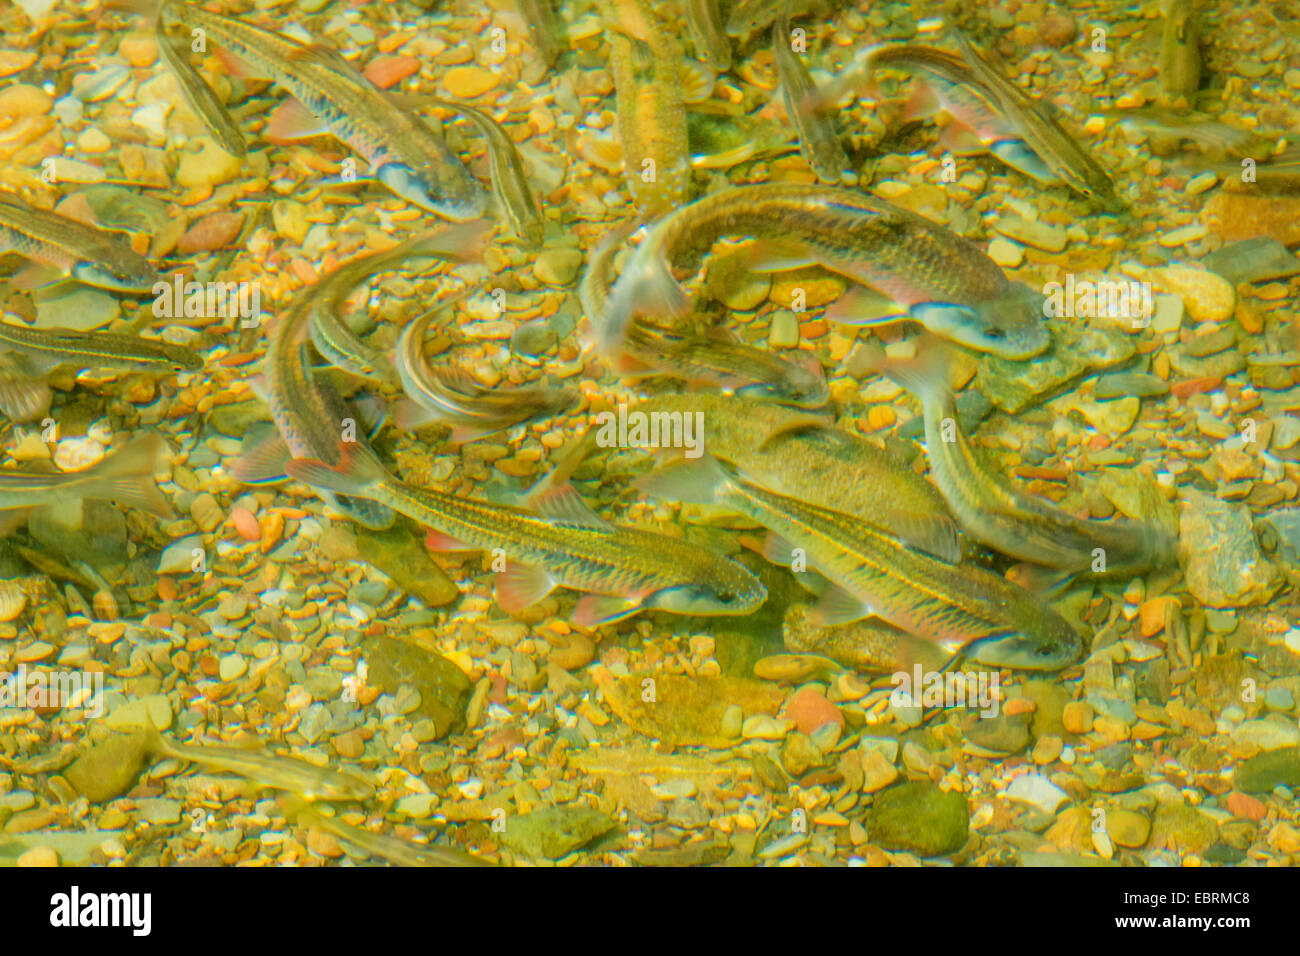 Tennessee striped shinner  (Luxilus chrysocephalus), spawning school, USA, Tennessee, Great Smoky Mountains National Park Stock Photo